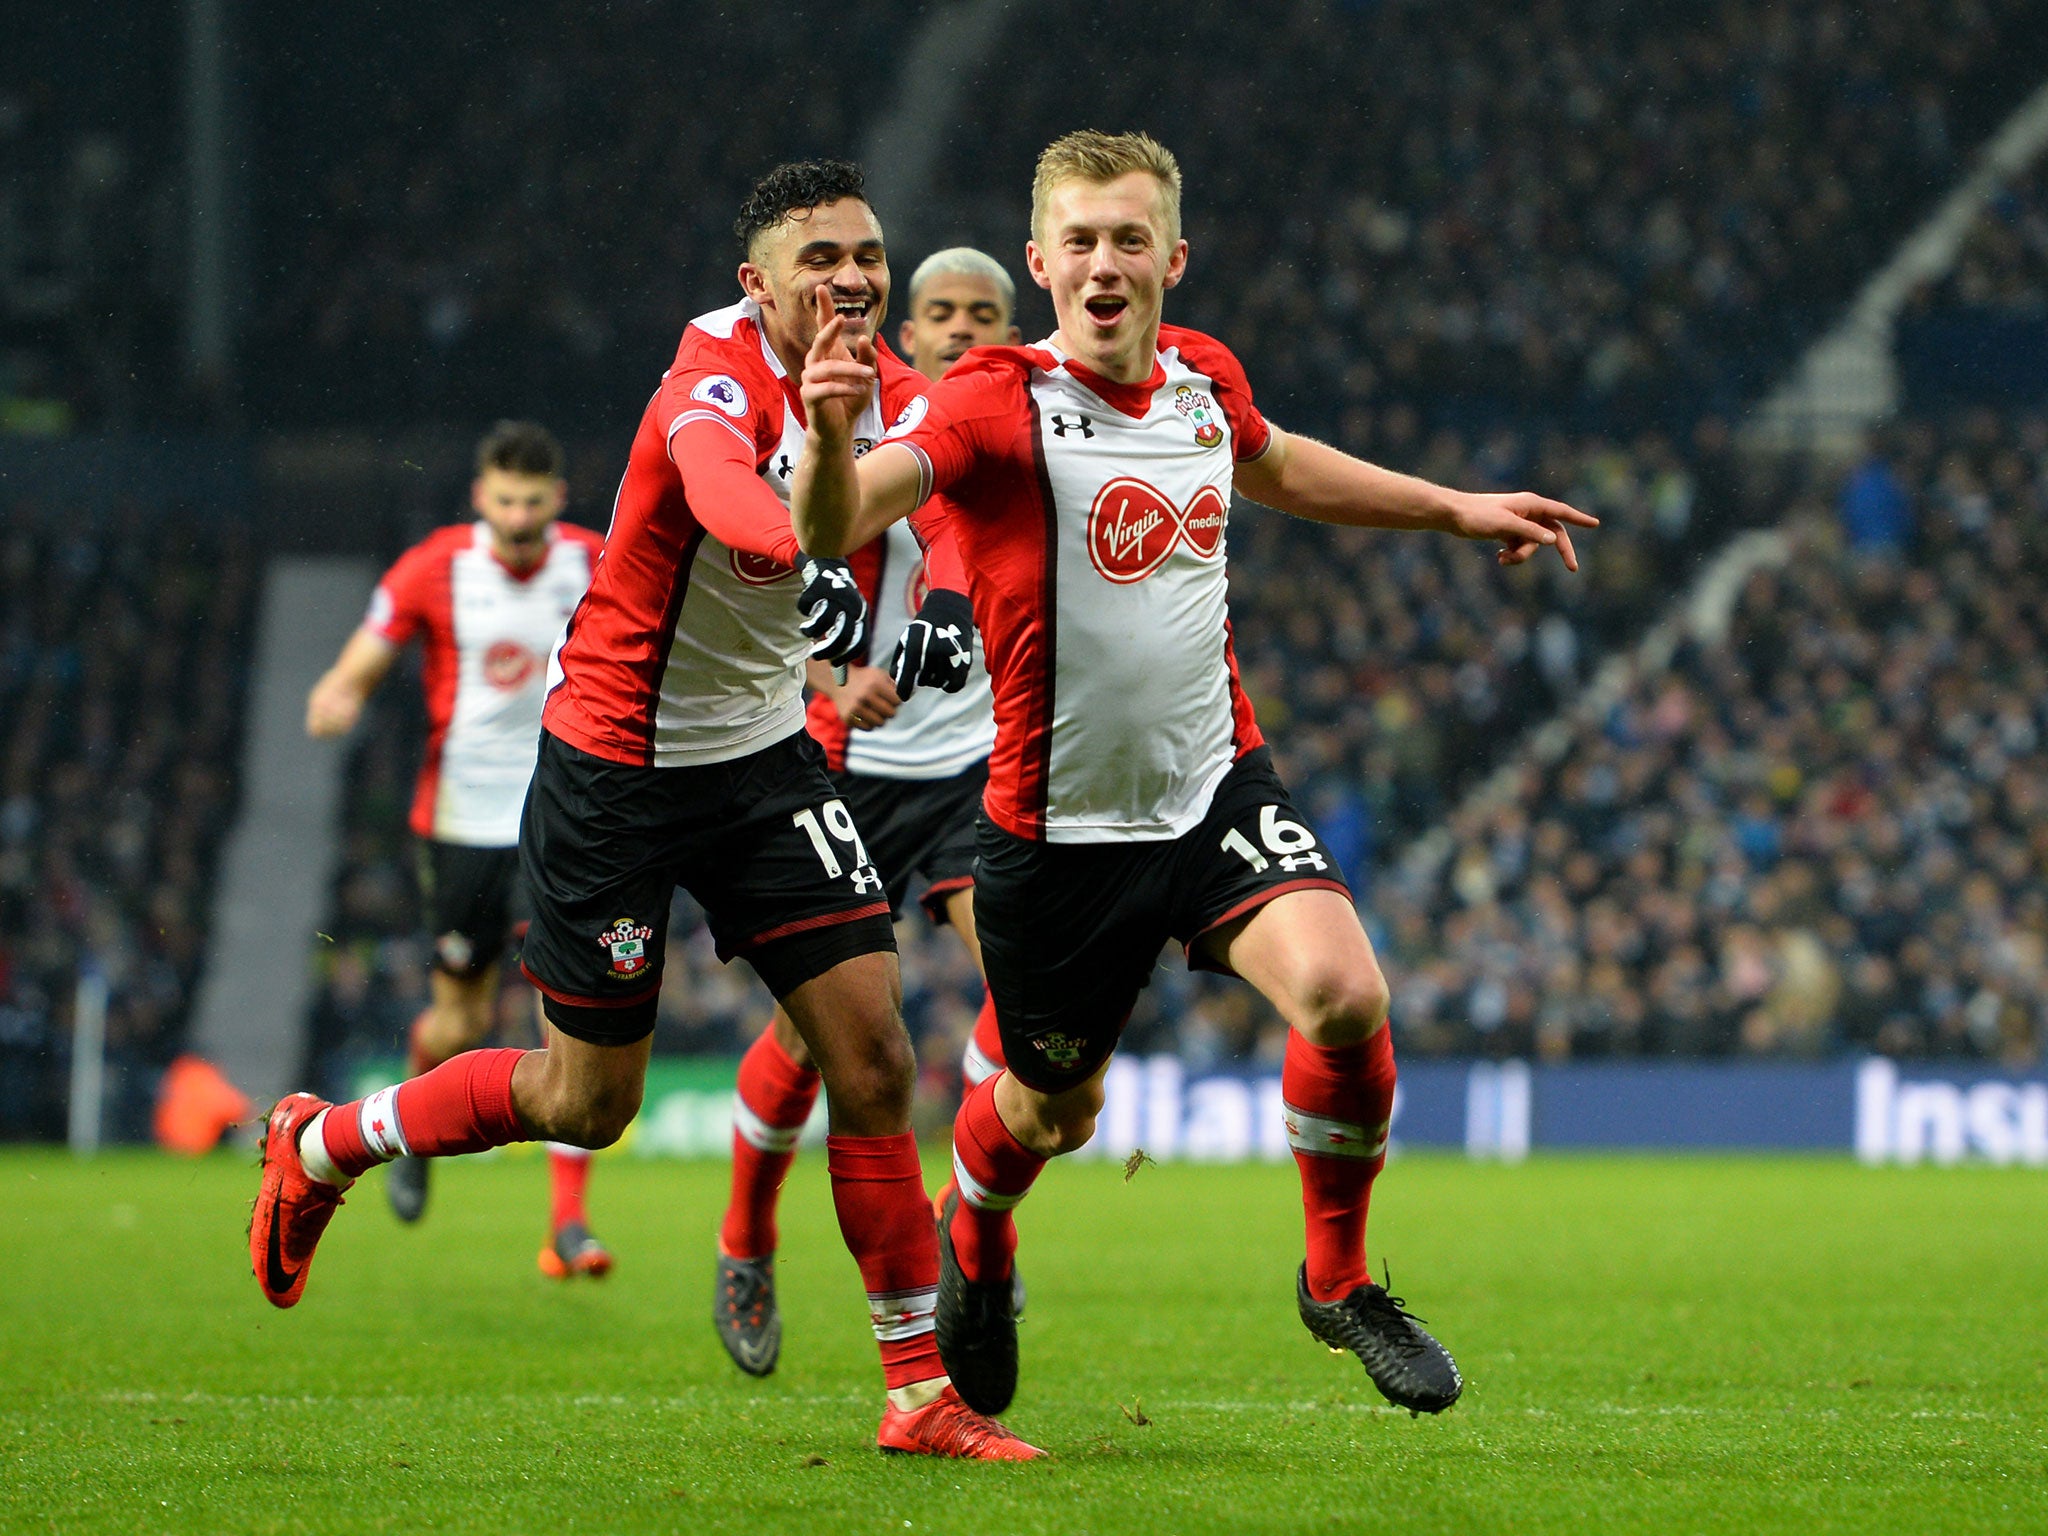 James Ward-Prowse clinched what turned out to be the winning goal